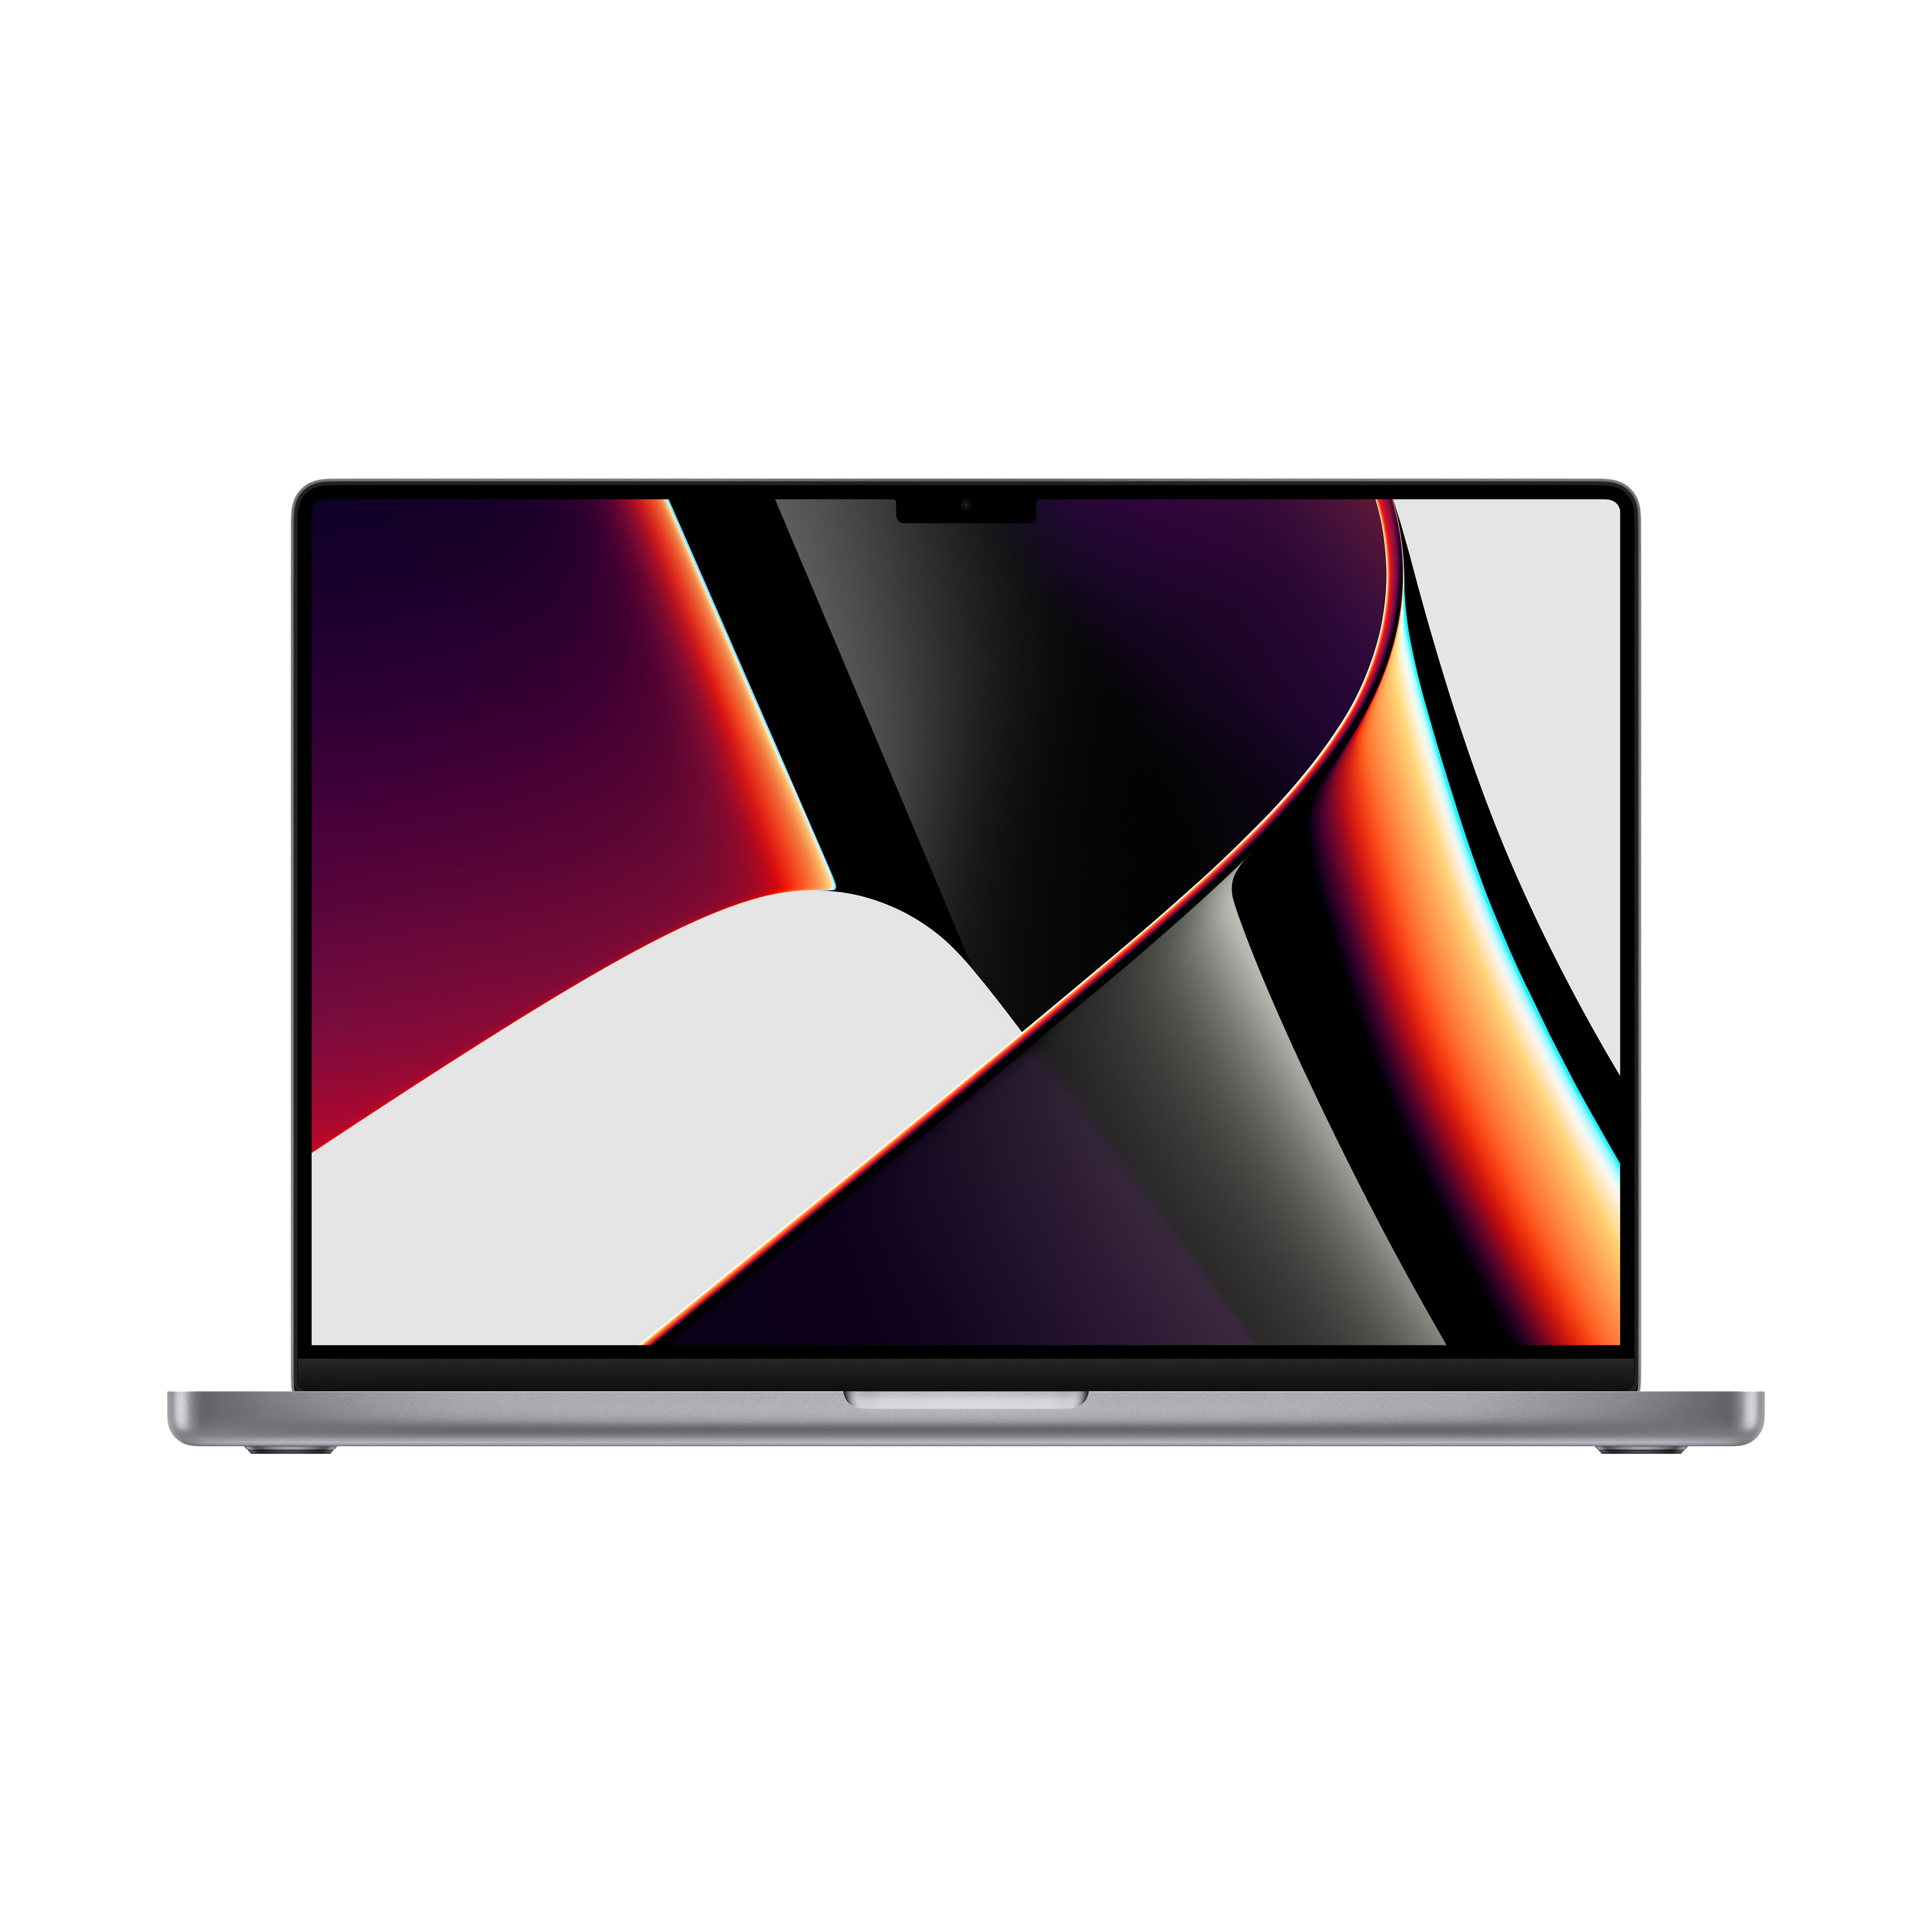  16inch (2021) MacBook Pro  M1 Max chip with 10-core CPU and 32-core GPU 1TB SSD Space Grey Qwerty